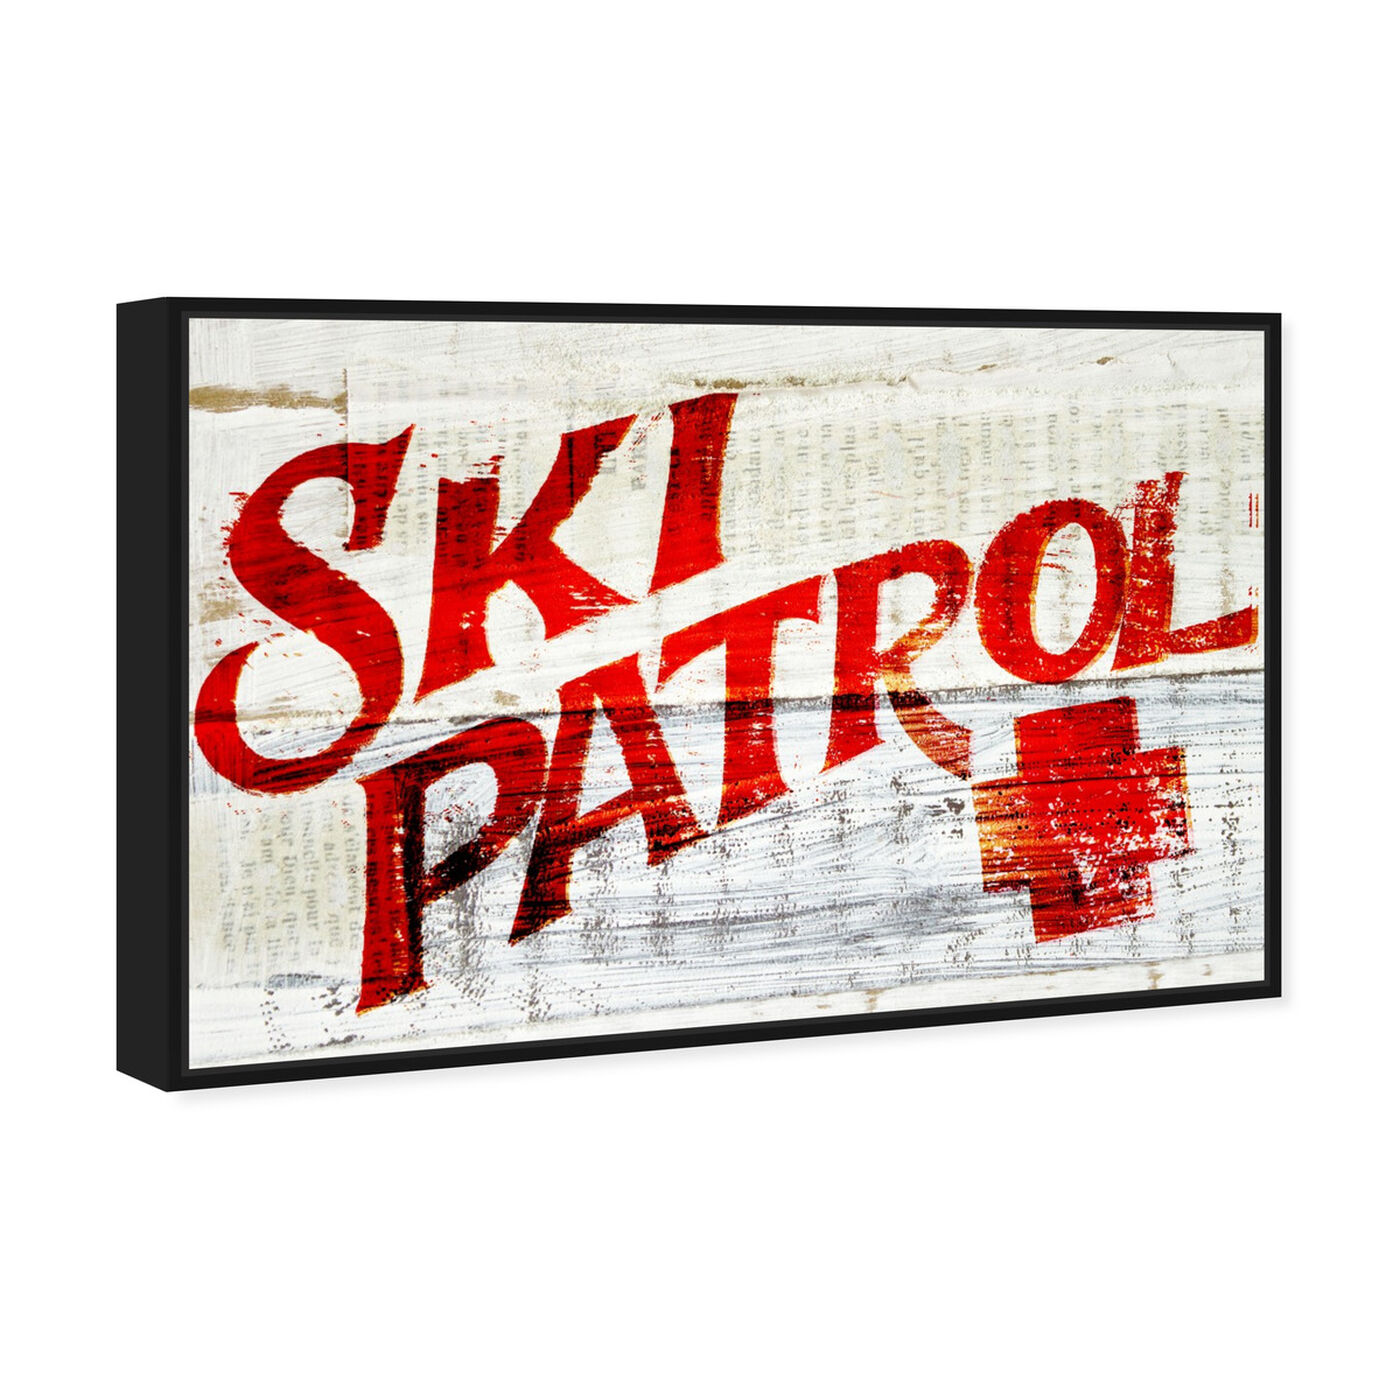 Angled view of Ski Patrol Vintage featuring advertising and posters art.